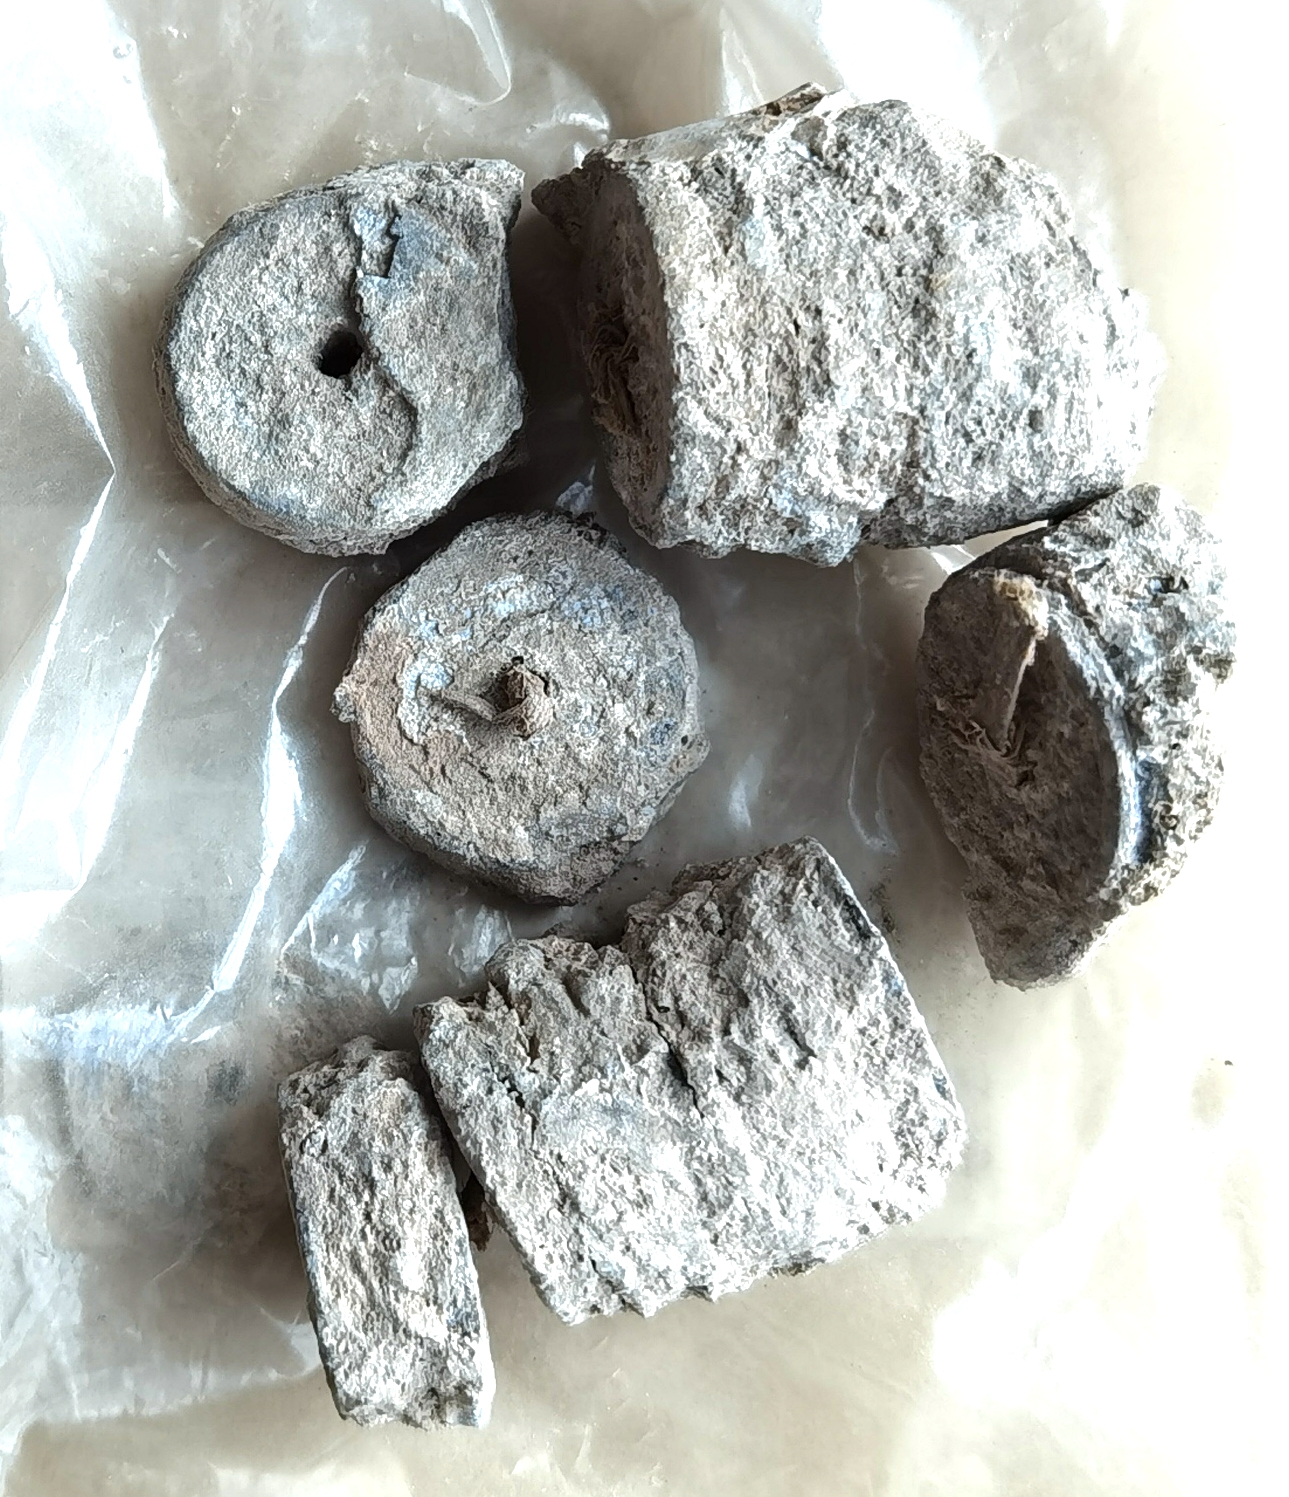 K7261, Annam (Vietnam) Uncleaned Coins in Clumps with Rope, AD 1800's, 0.22 Kg